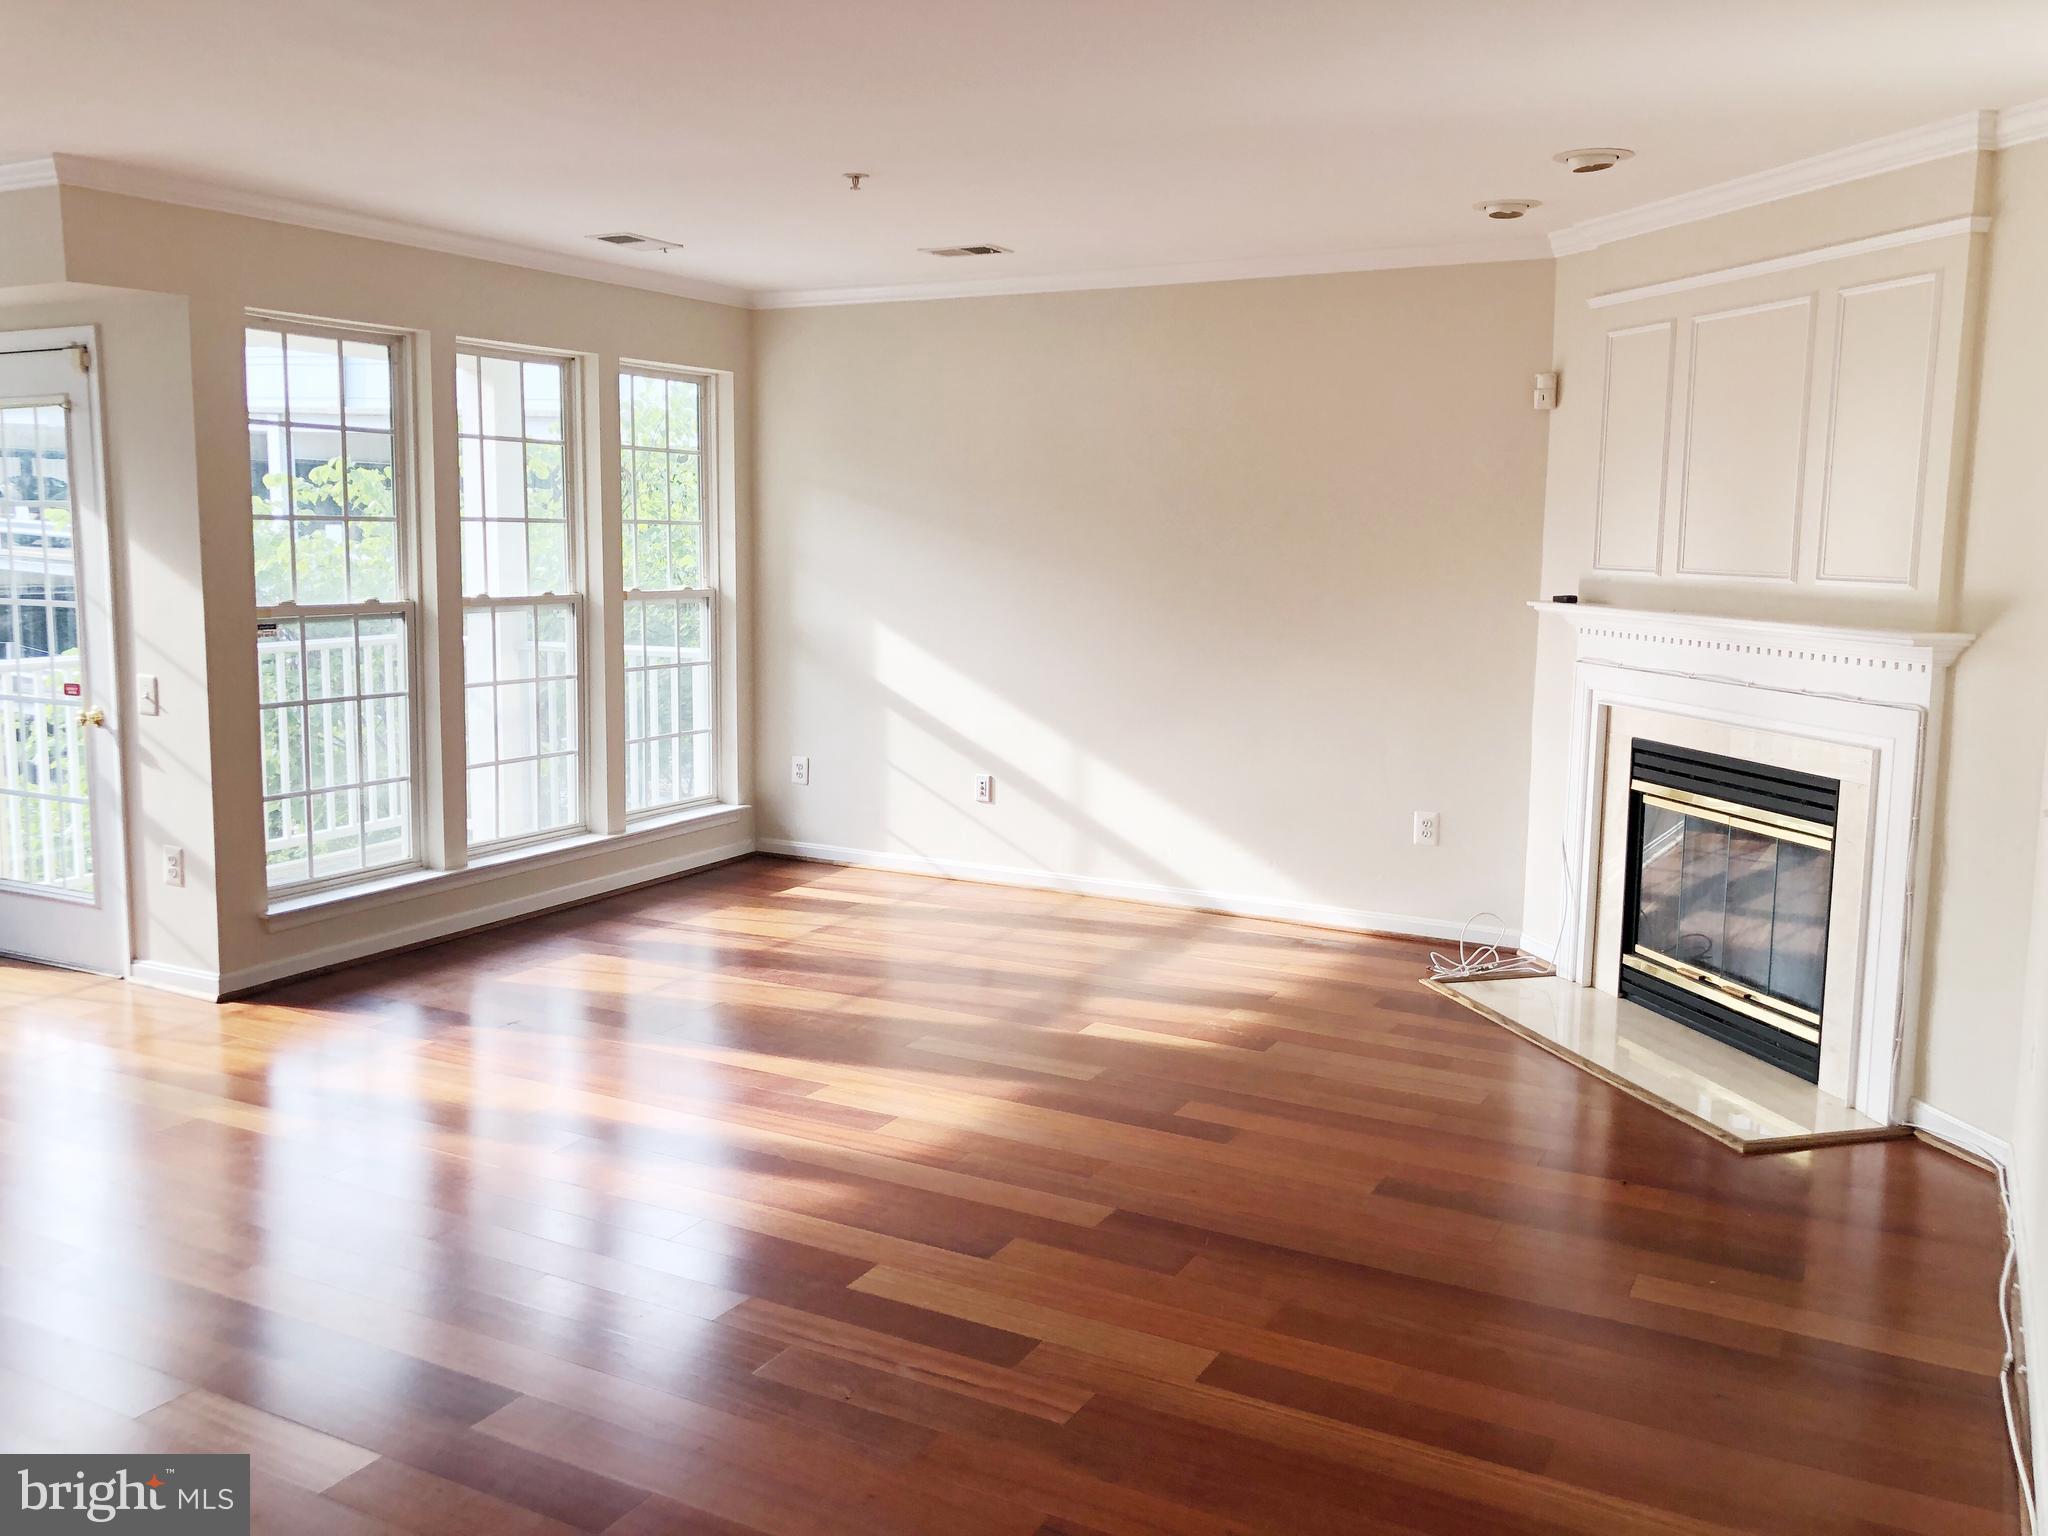 a view of an empty room with window wooden floor and fire place